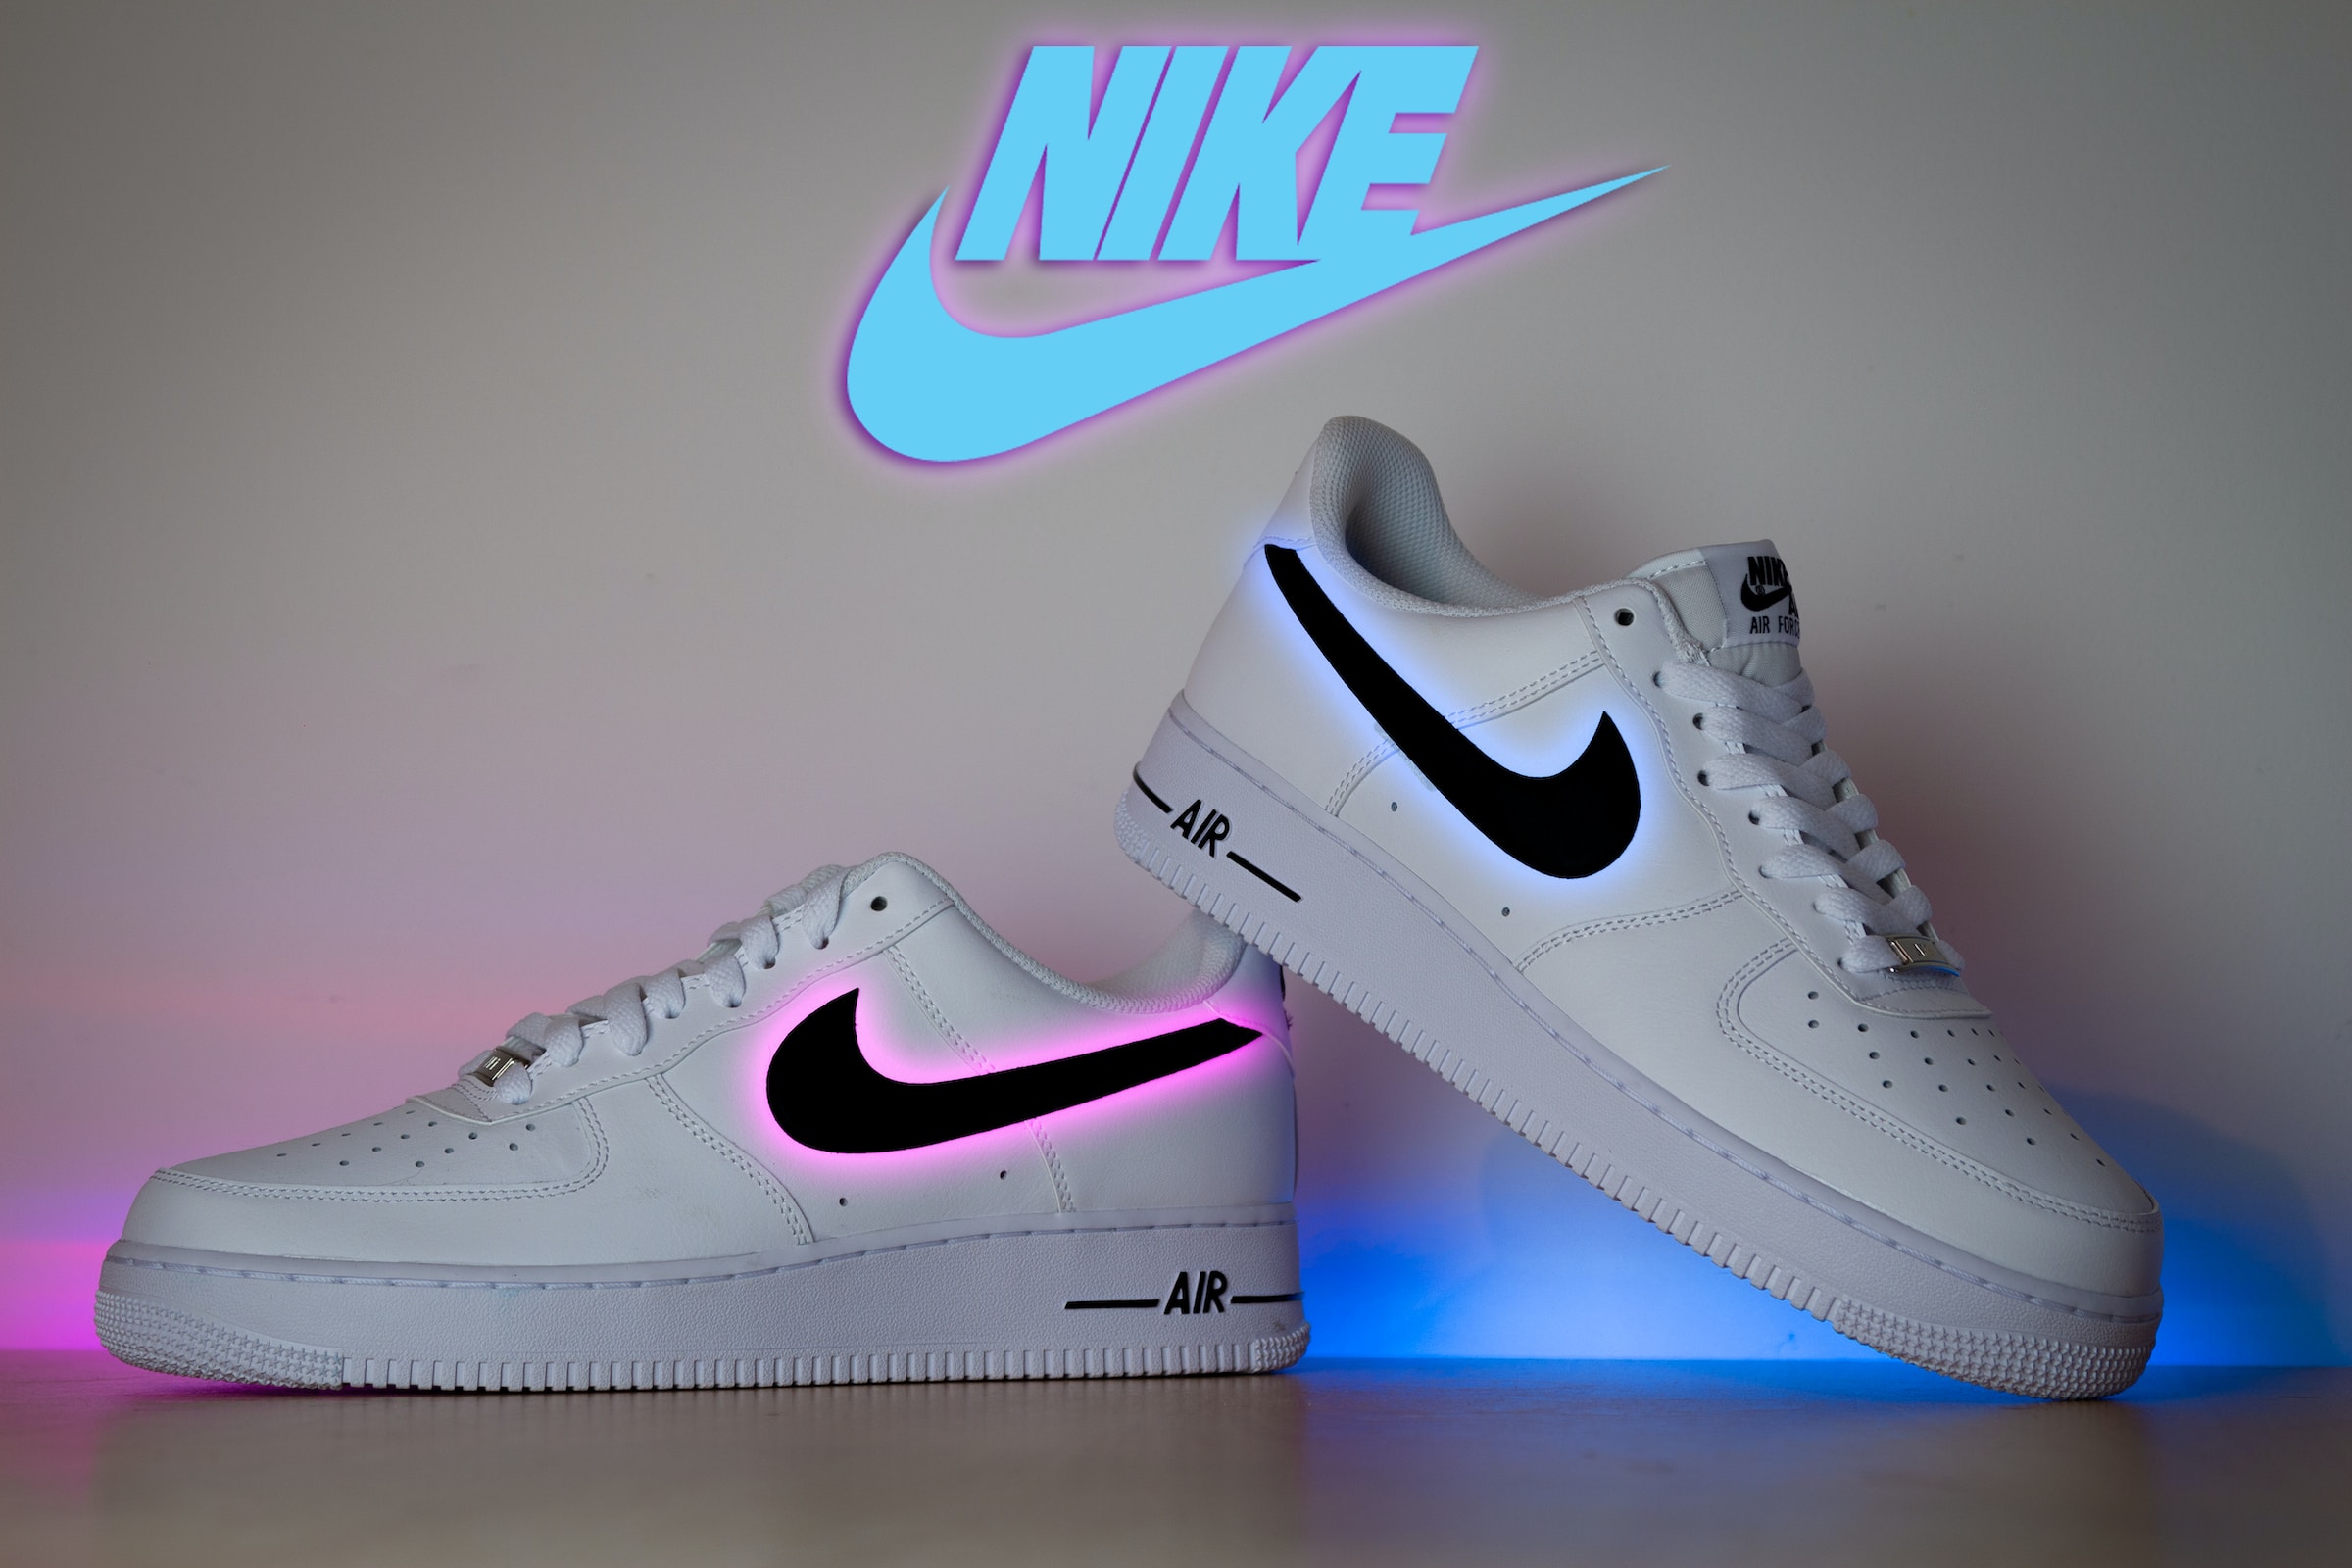 Co to jest Nike Air Force 1?